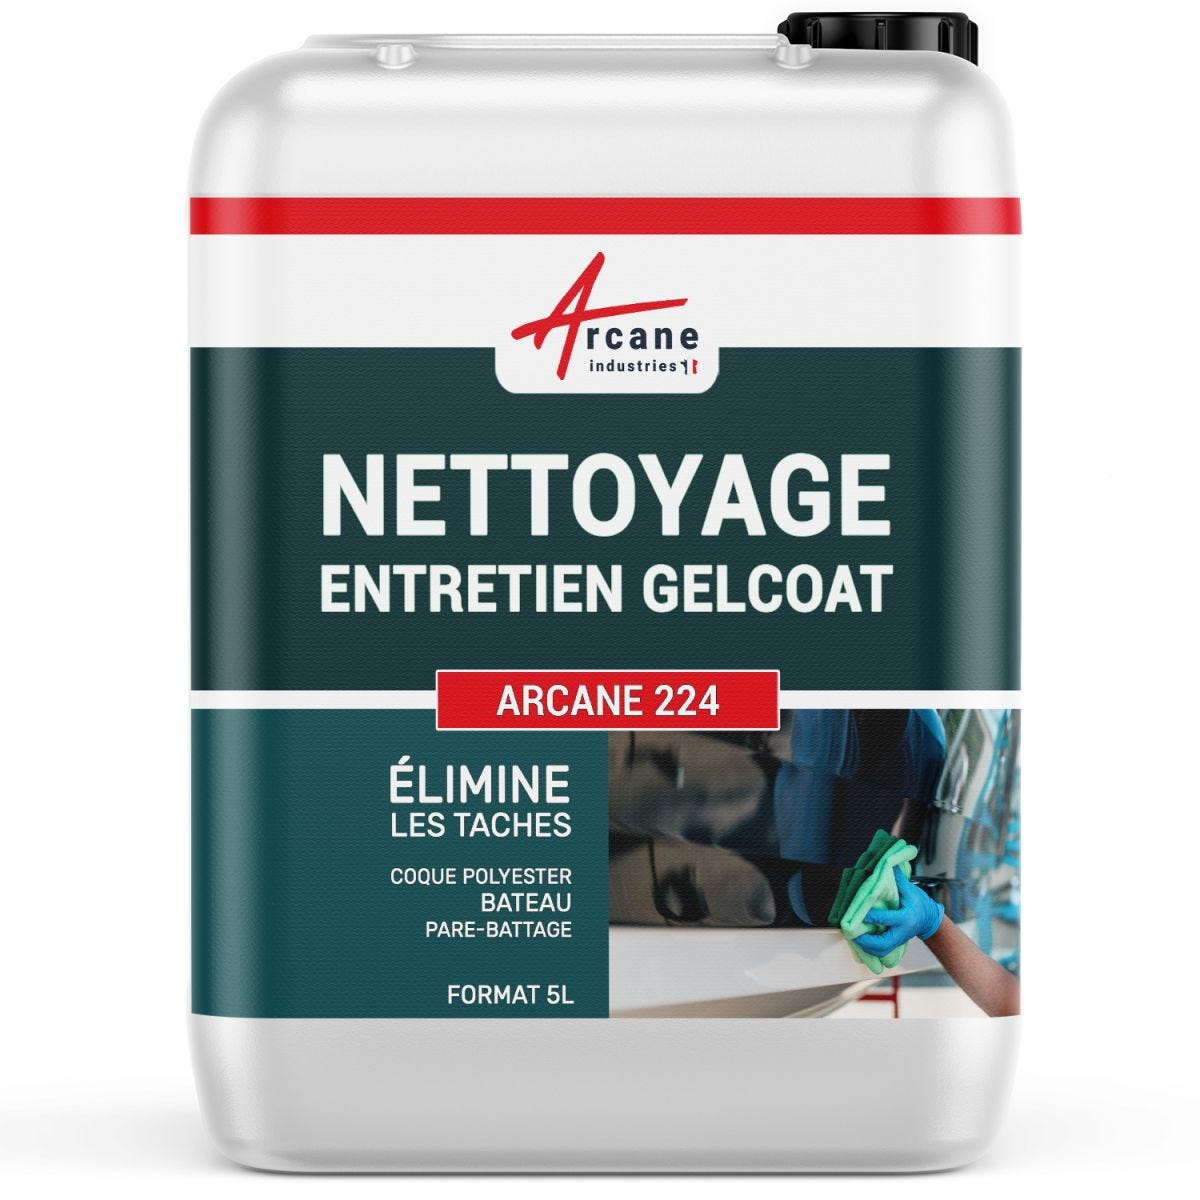 NETTOYAGE ENTRETIEN GELCOAT- Nettoyant coques polyester - 5 L - - ARCANE INDUSTRIES 3